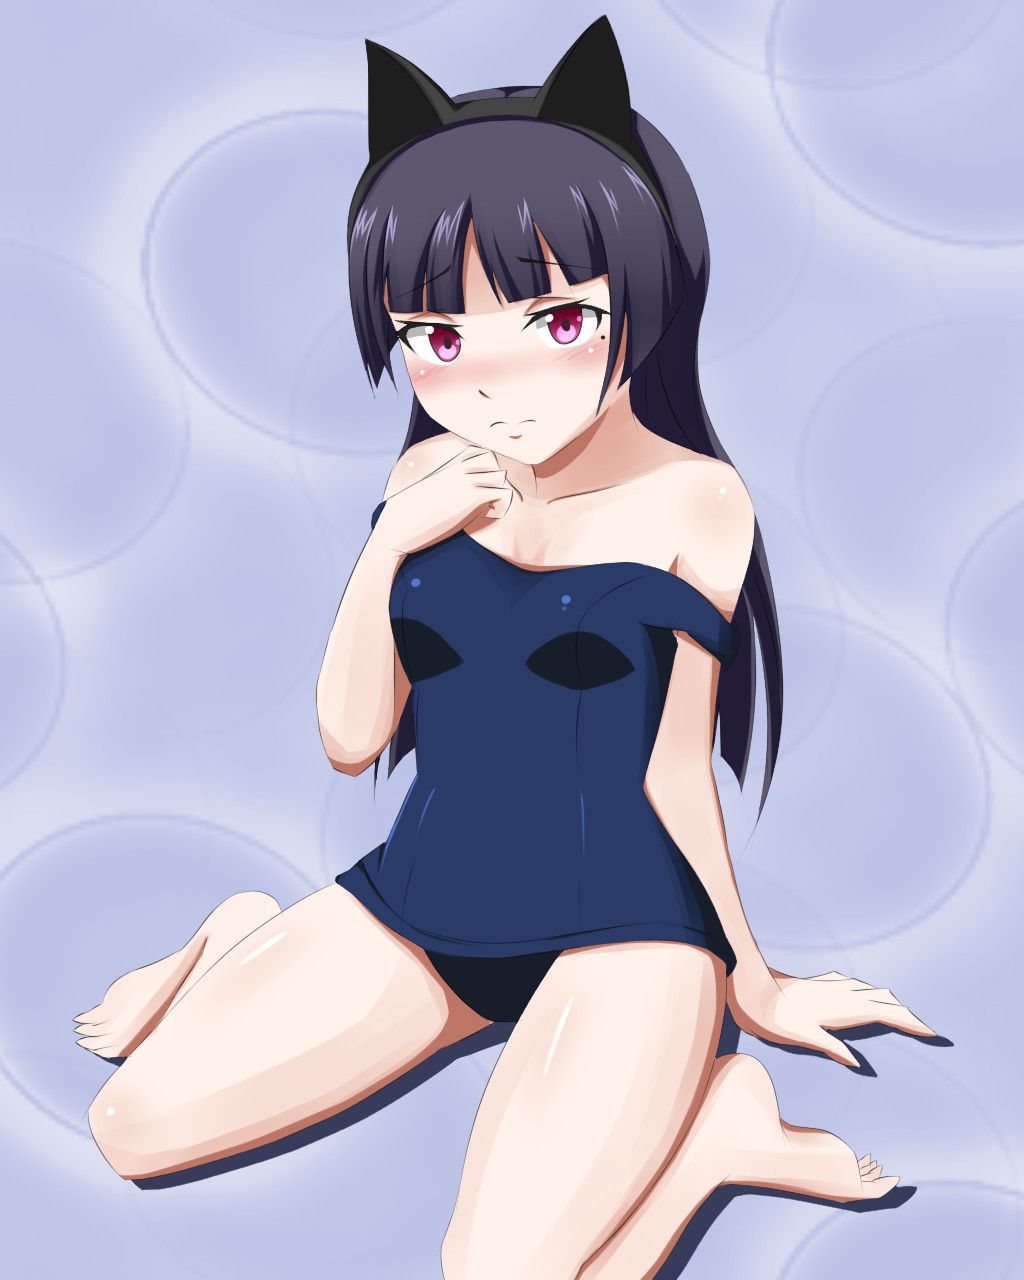 [Two-dimensional] I want to see the swimsuit of cute girl, please erotic images 8